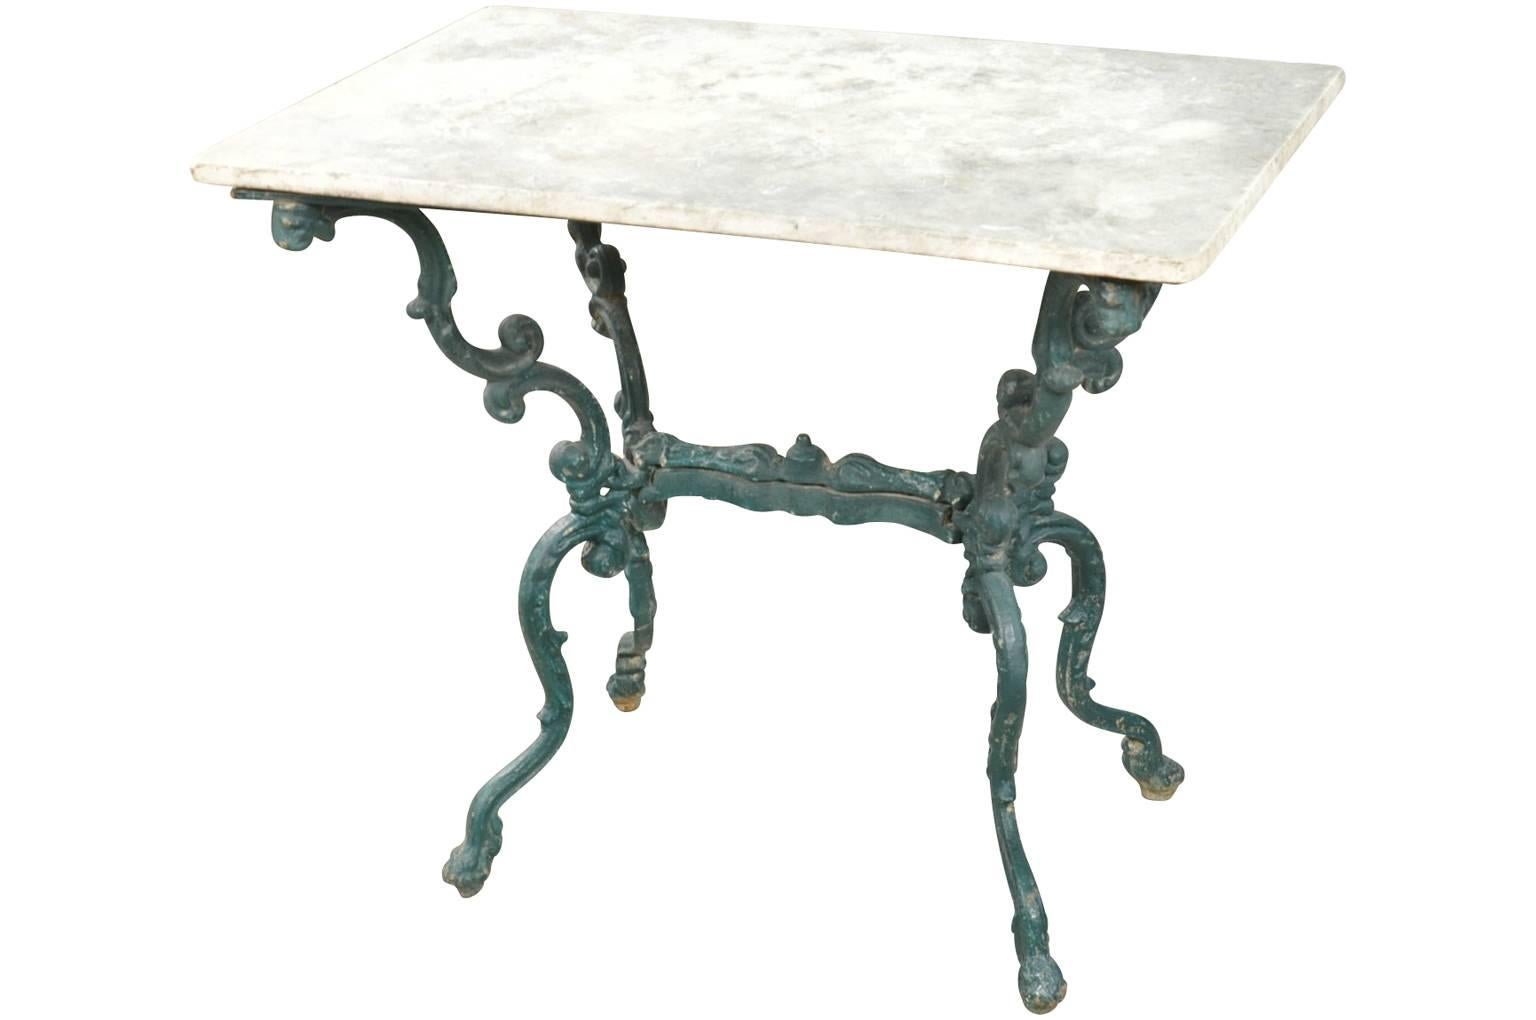 A fabulous 19th century Italian bistro table / garden table in cast iron and its original marble top. Wonderful patina throughout. Perfect occasional table - whether for the interior or the exterior.